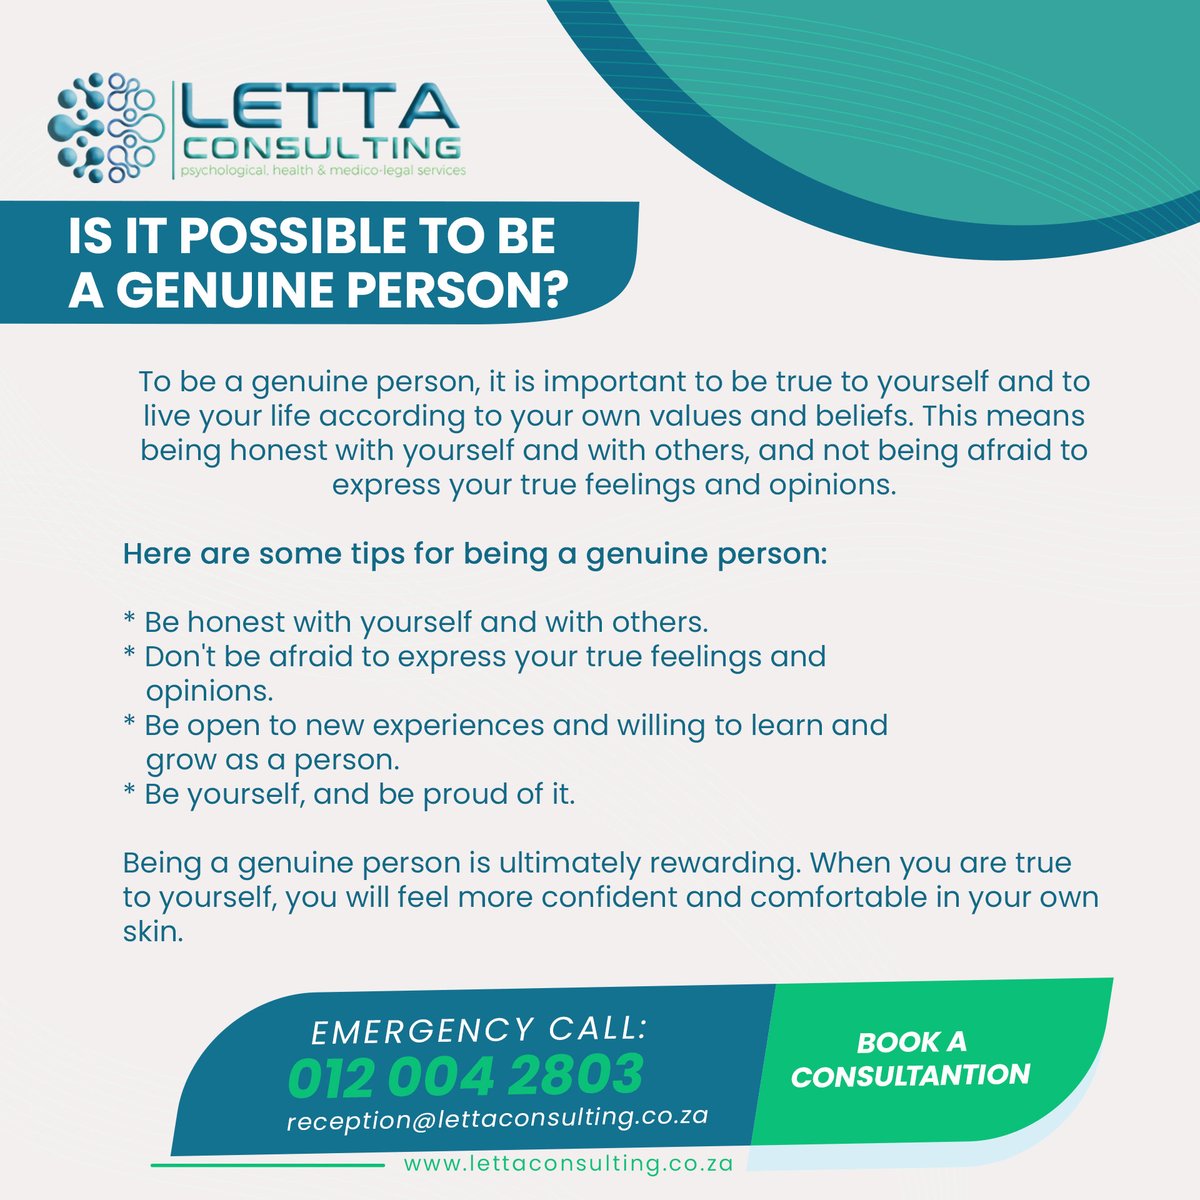 Genuine Person
#genuineperson #relationships #therapy #psychologist #mentalhealth #healthyrelationships #communication #depression #lettaconsulting

Let us help!
buff.ly/48bnwBA
Call us at: 012 004 2803
Whatsapp: 0657213258
Email: reception@lettaconsulting.co.za